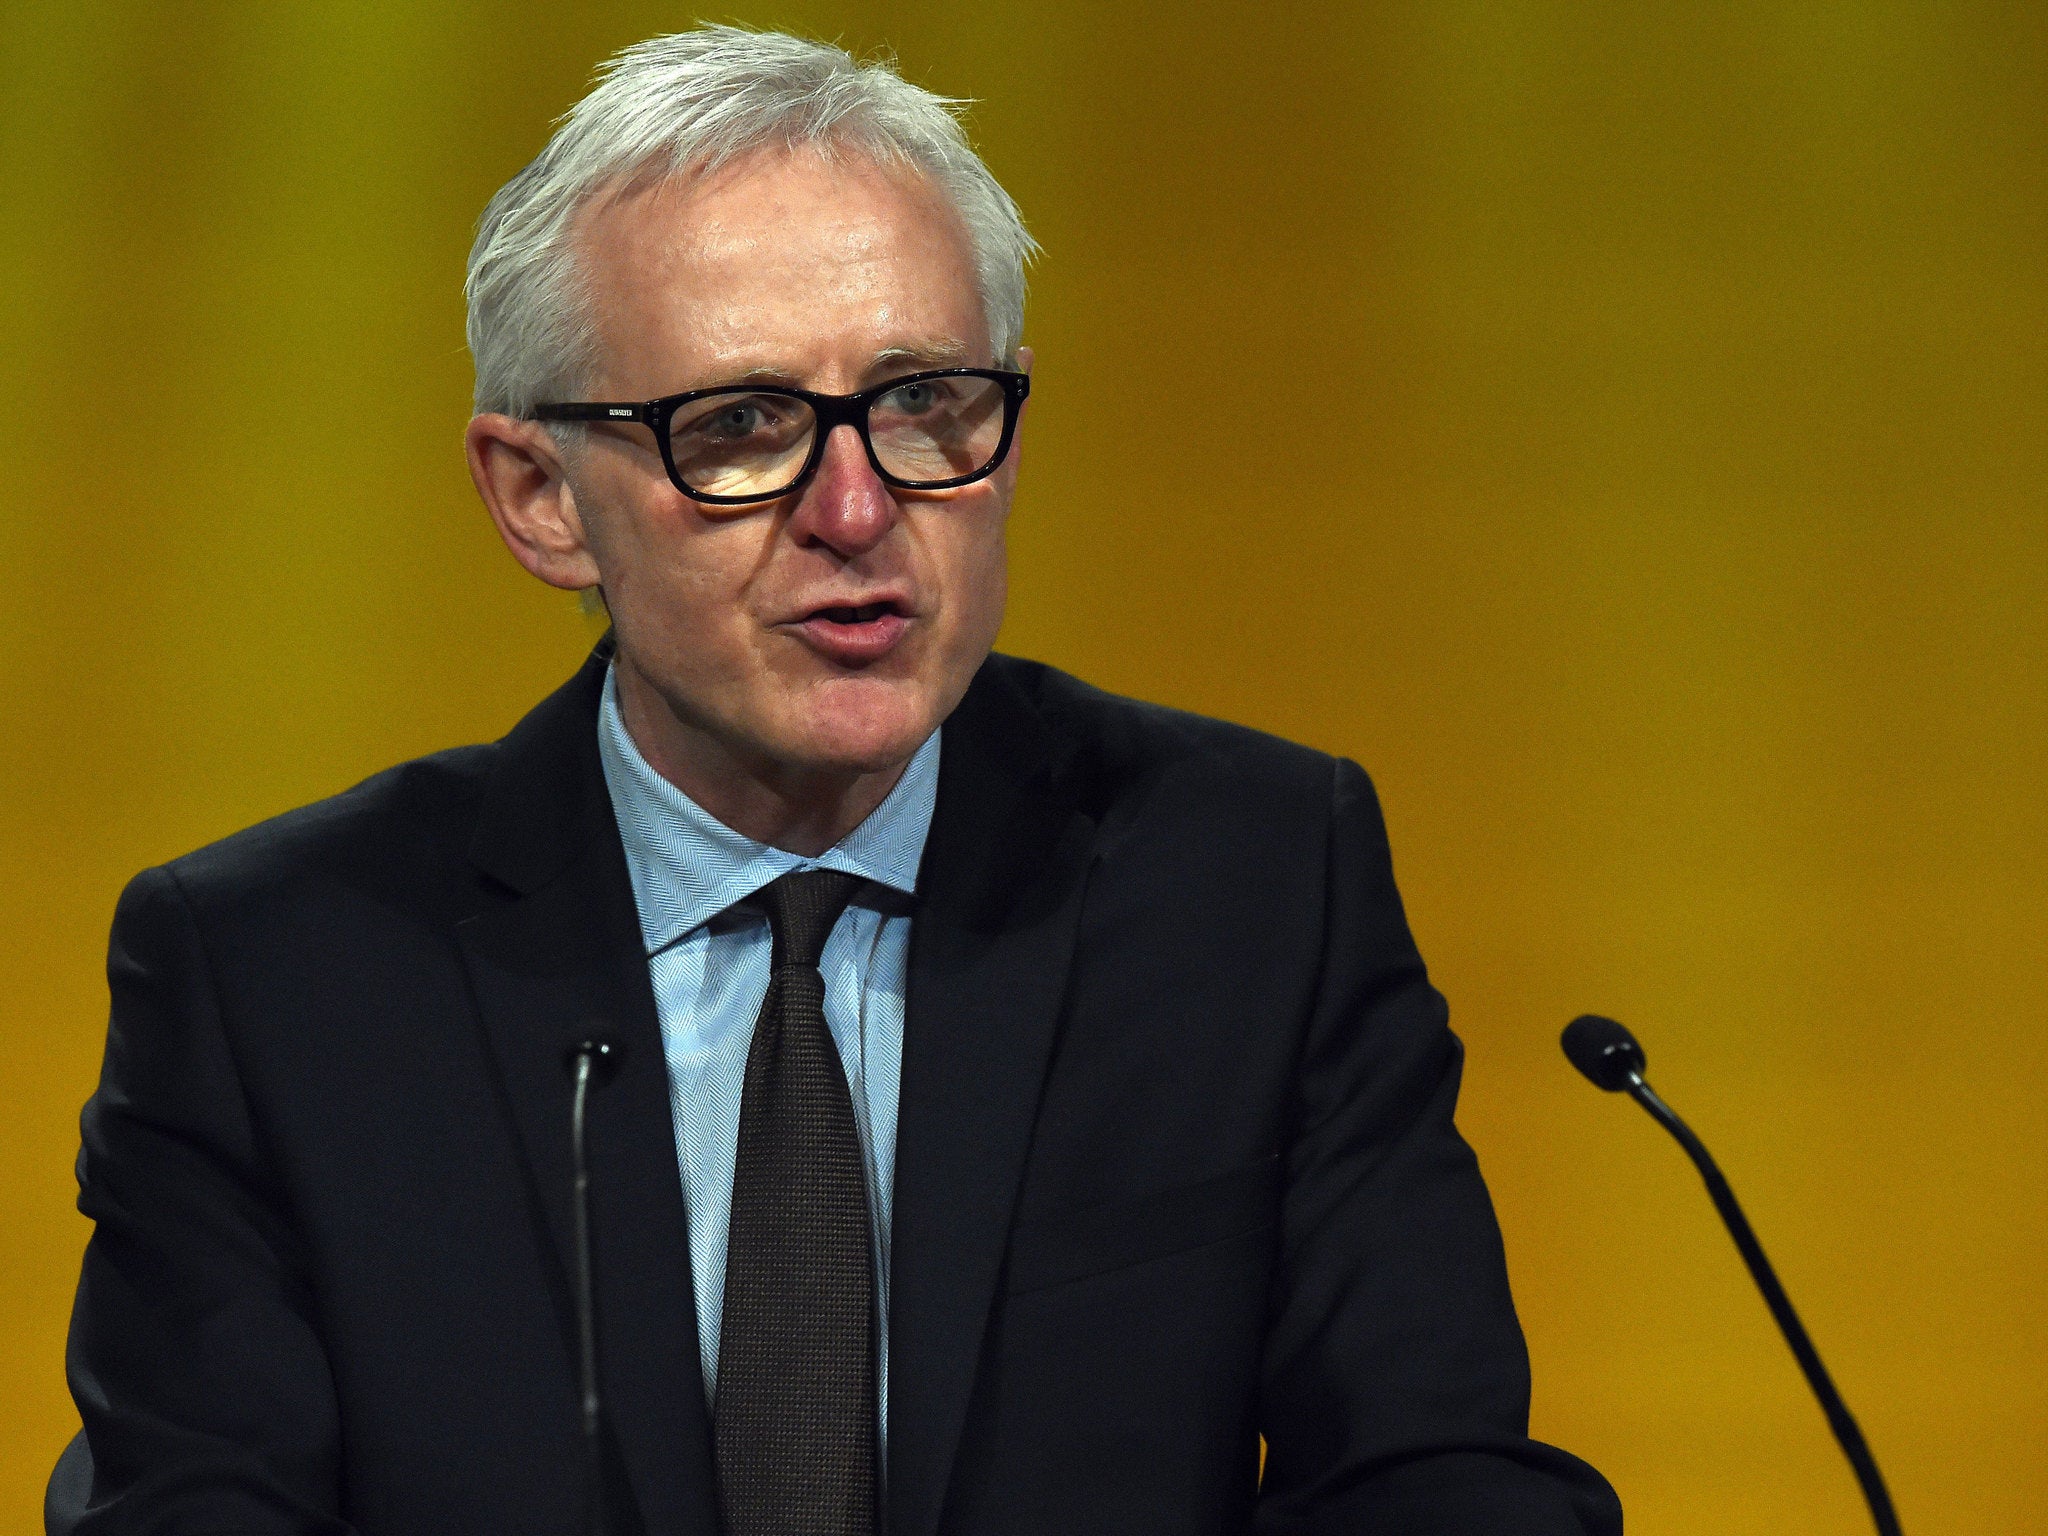 Norman Lamb is battling with Tim Farron for the leadership of the Liberal Democrats